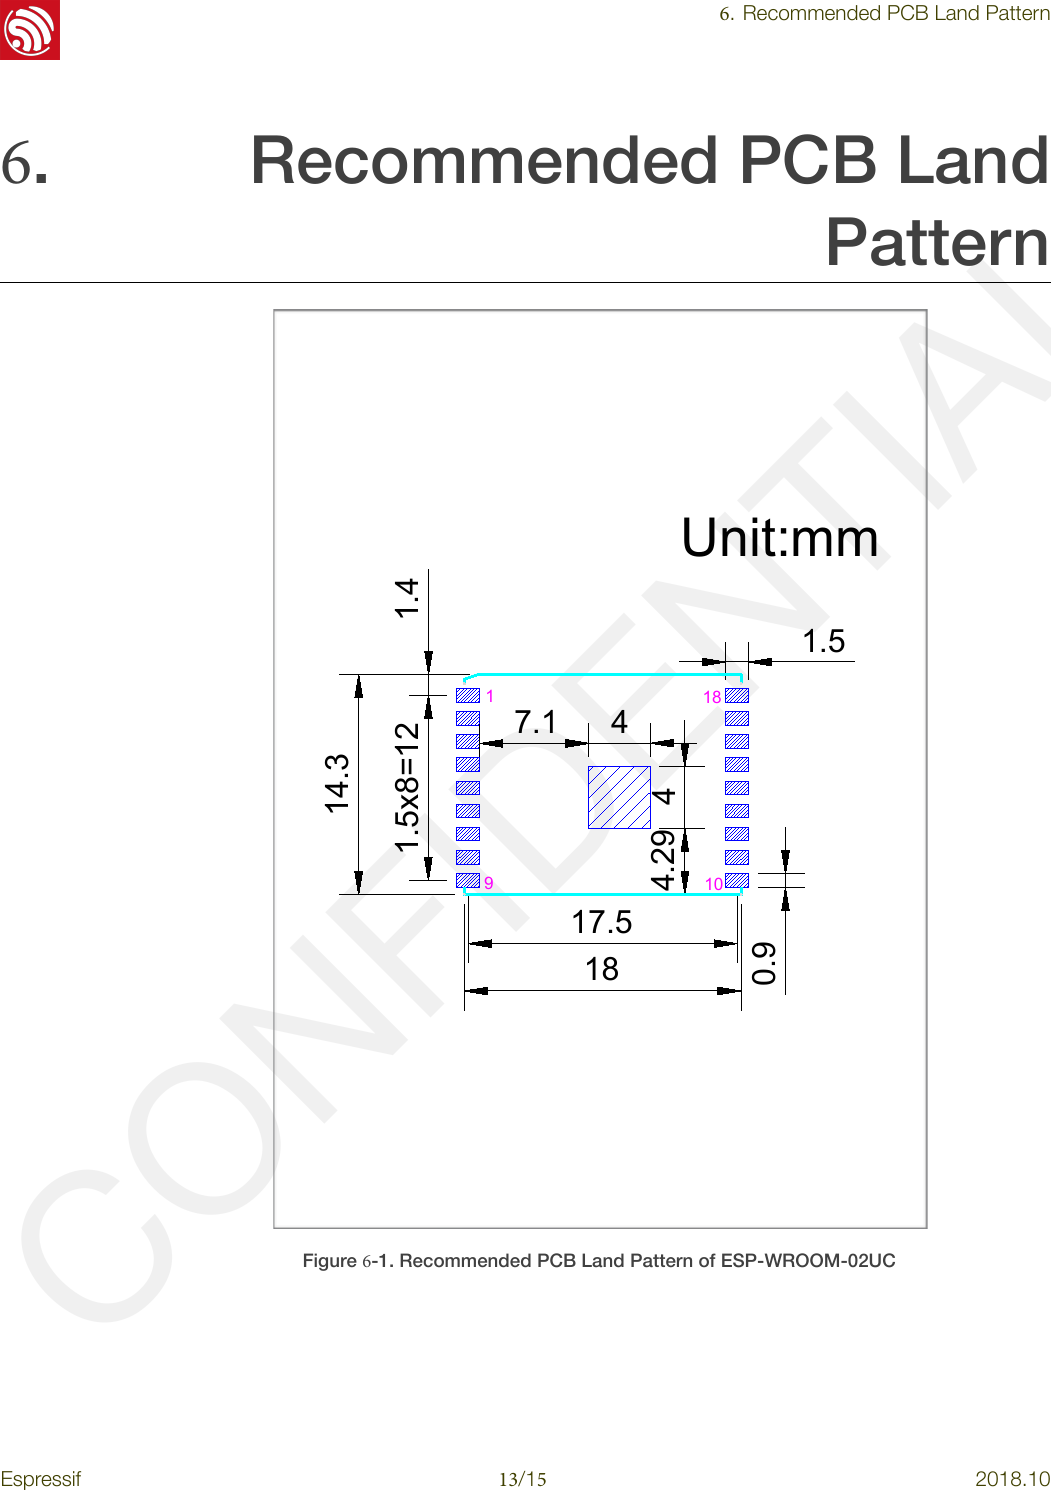 CONFIDENTIAL!6.Recommended PCB Land Pattern6.Recommended PCB LandPattern !Figure 6-1. Recommended PCB Land Pattern of ESP-WROOM-02UC Unit:mm1.5x8=121.517.544.2940.91910187.11.414.318Espressif!13/!152018.10